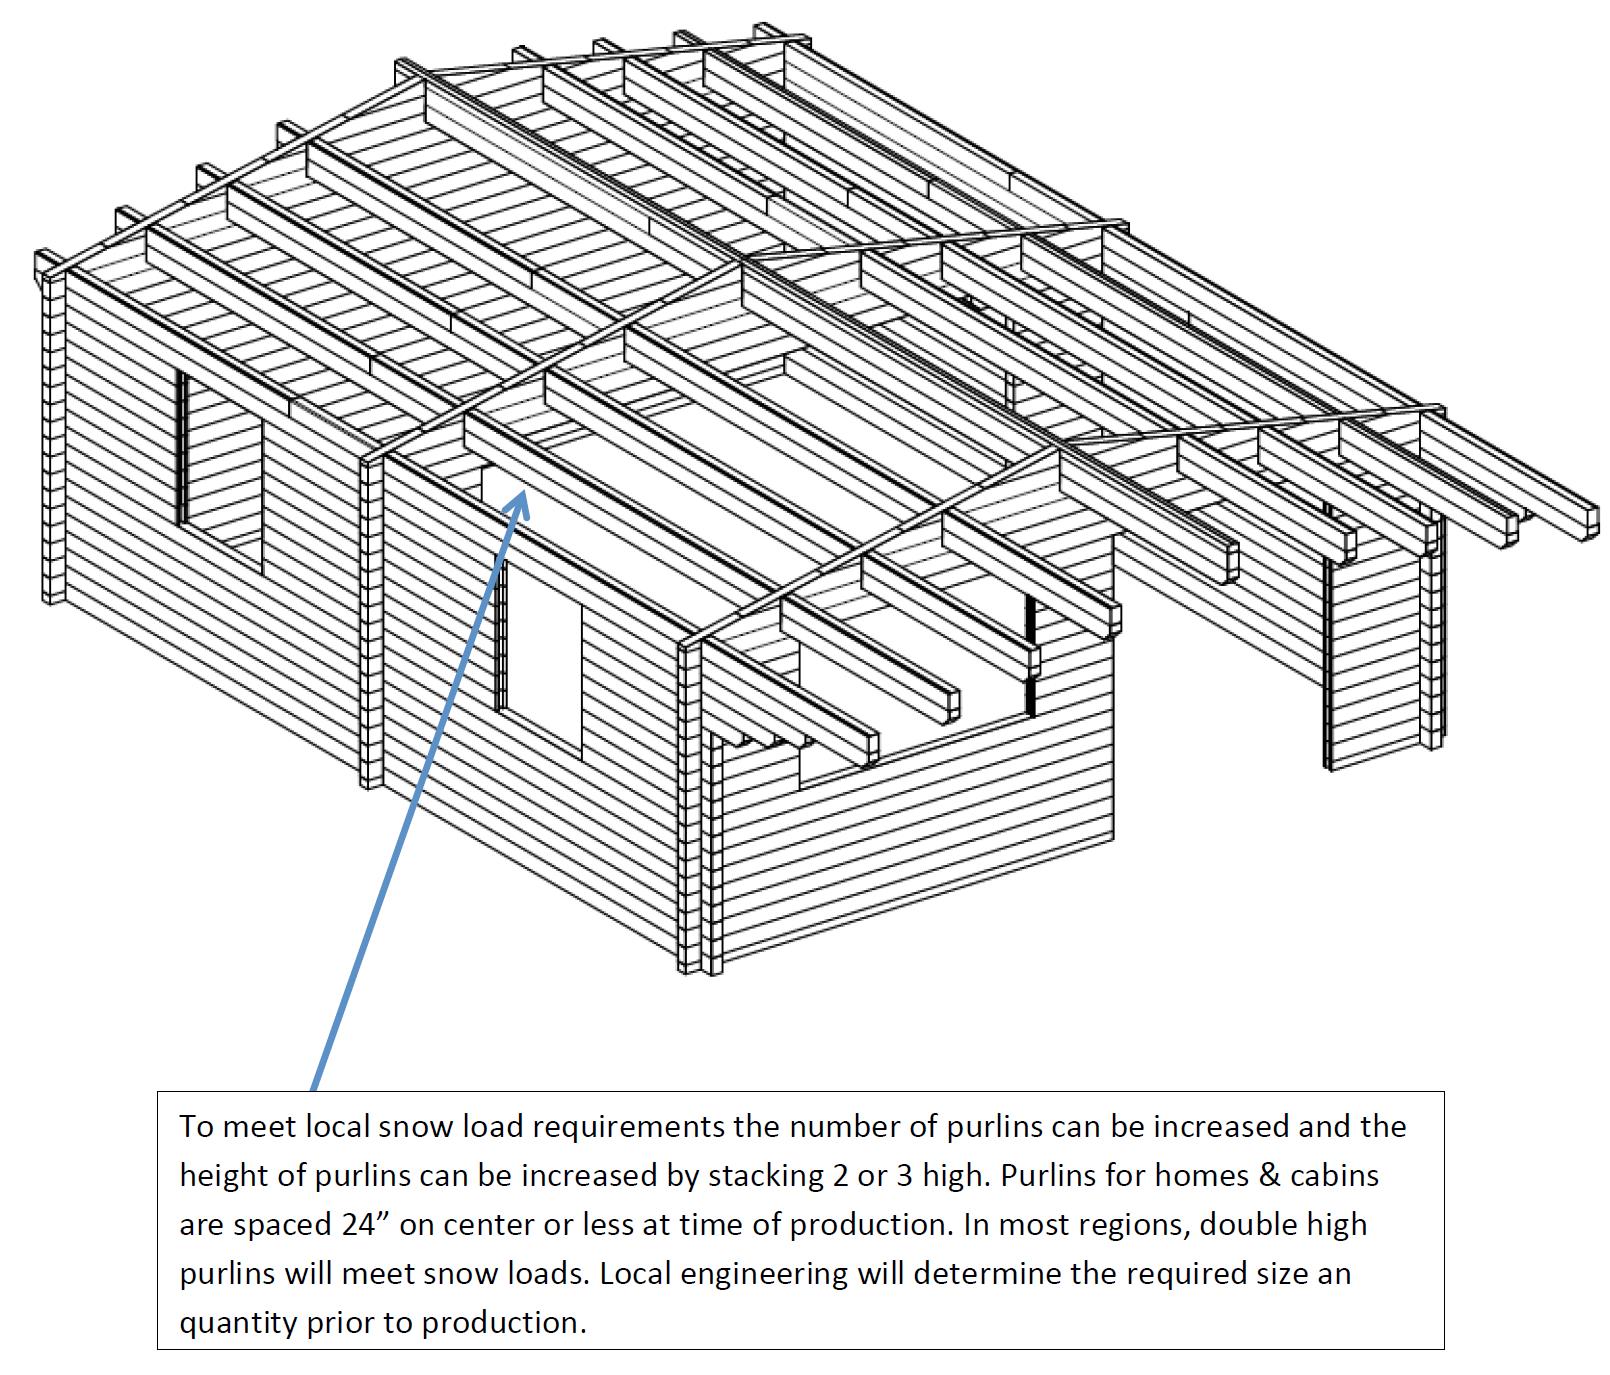 Roof Purlins & Snow Loads. To meet local snow load requirements the number of purlins can be increased and the height of purlins can be increased by stacking two or three high. Purlins for homes and cabins are spaced twenty four on center or less at time of production. In most regions, double high purlins will meet snow loads. Local engineering will determine the required size an quantity prior to production. Do it yourself building kits. EZ Log Structures.